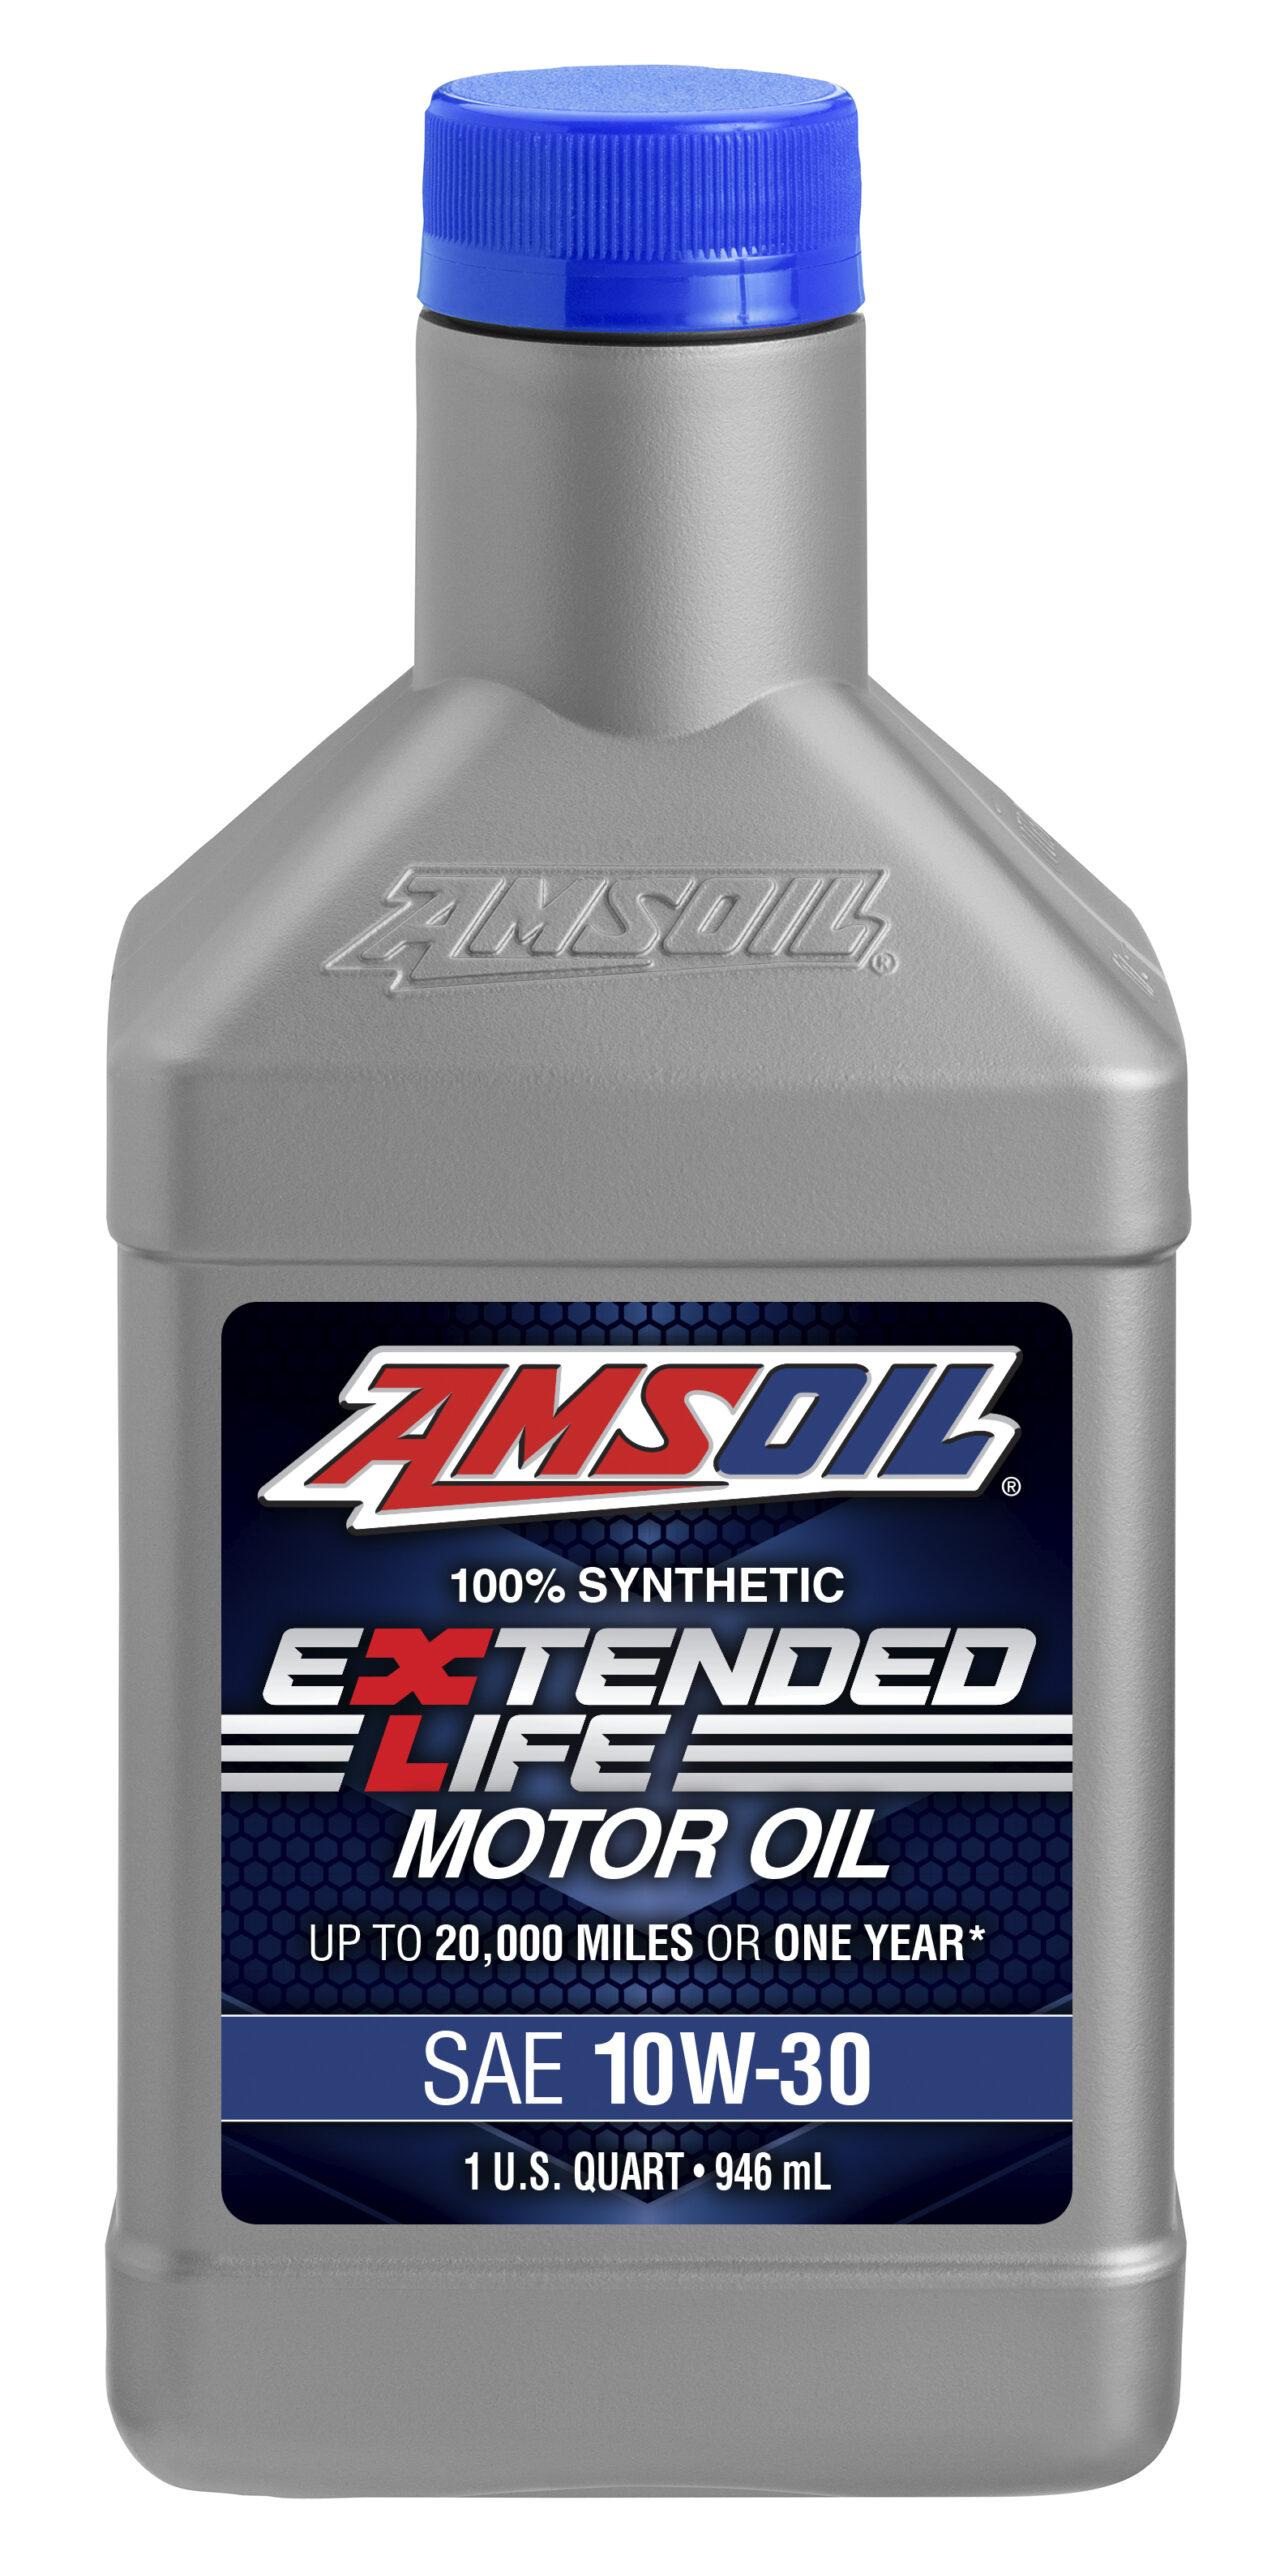 AMSOIL launches 3 new specialized motor oil families